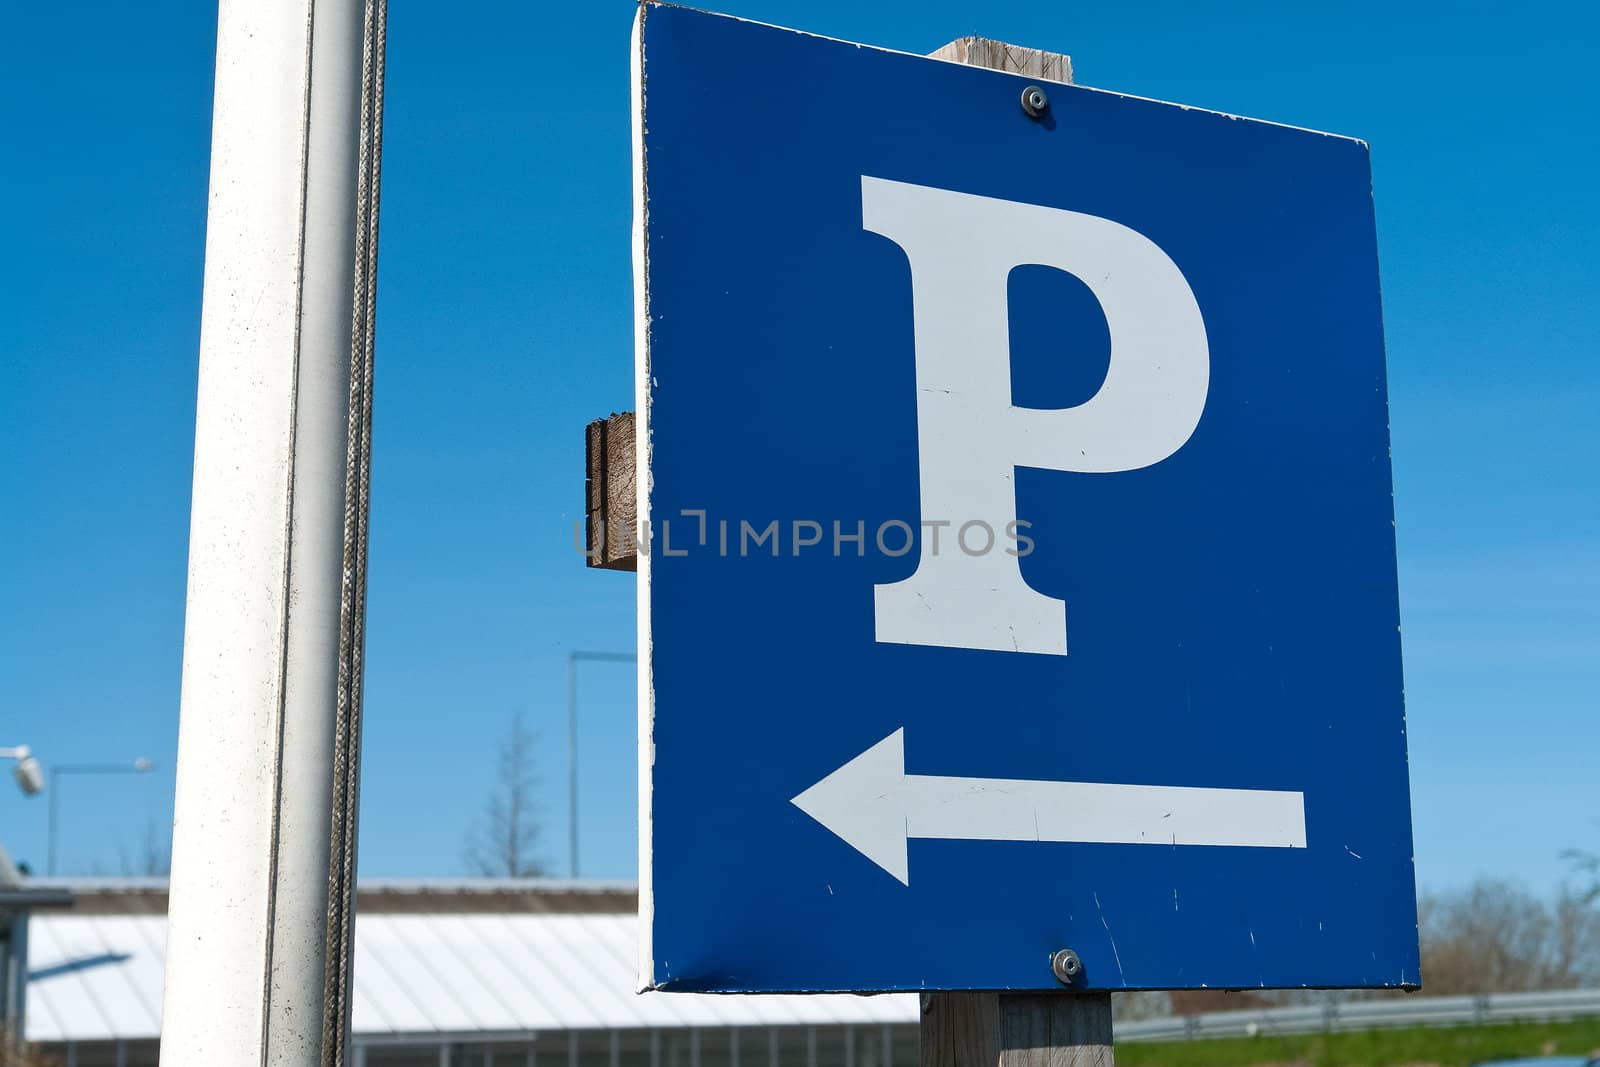 Parking sign horizontal image by Ronyzmbow